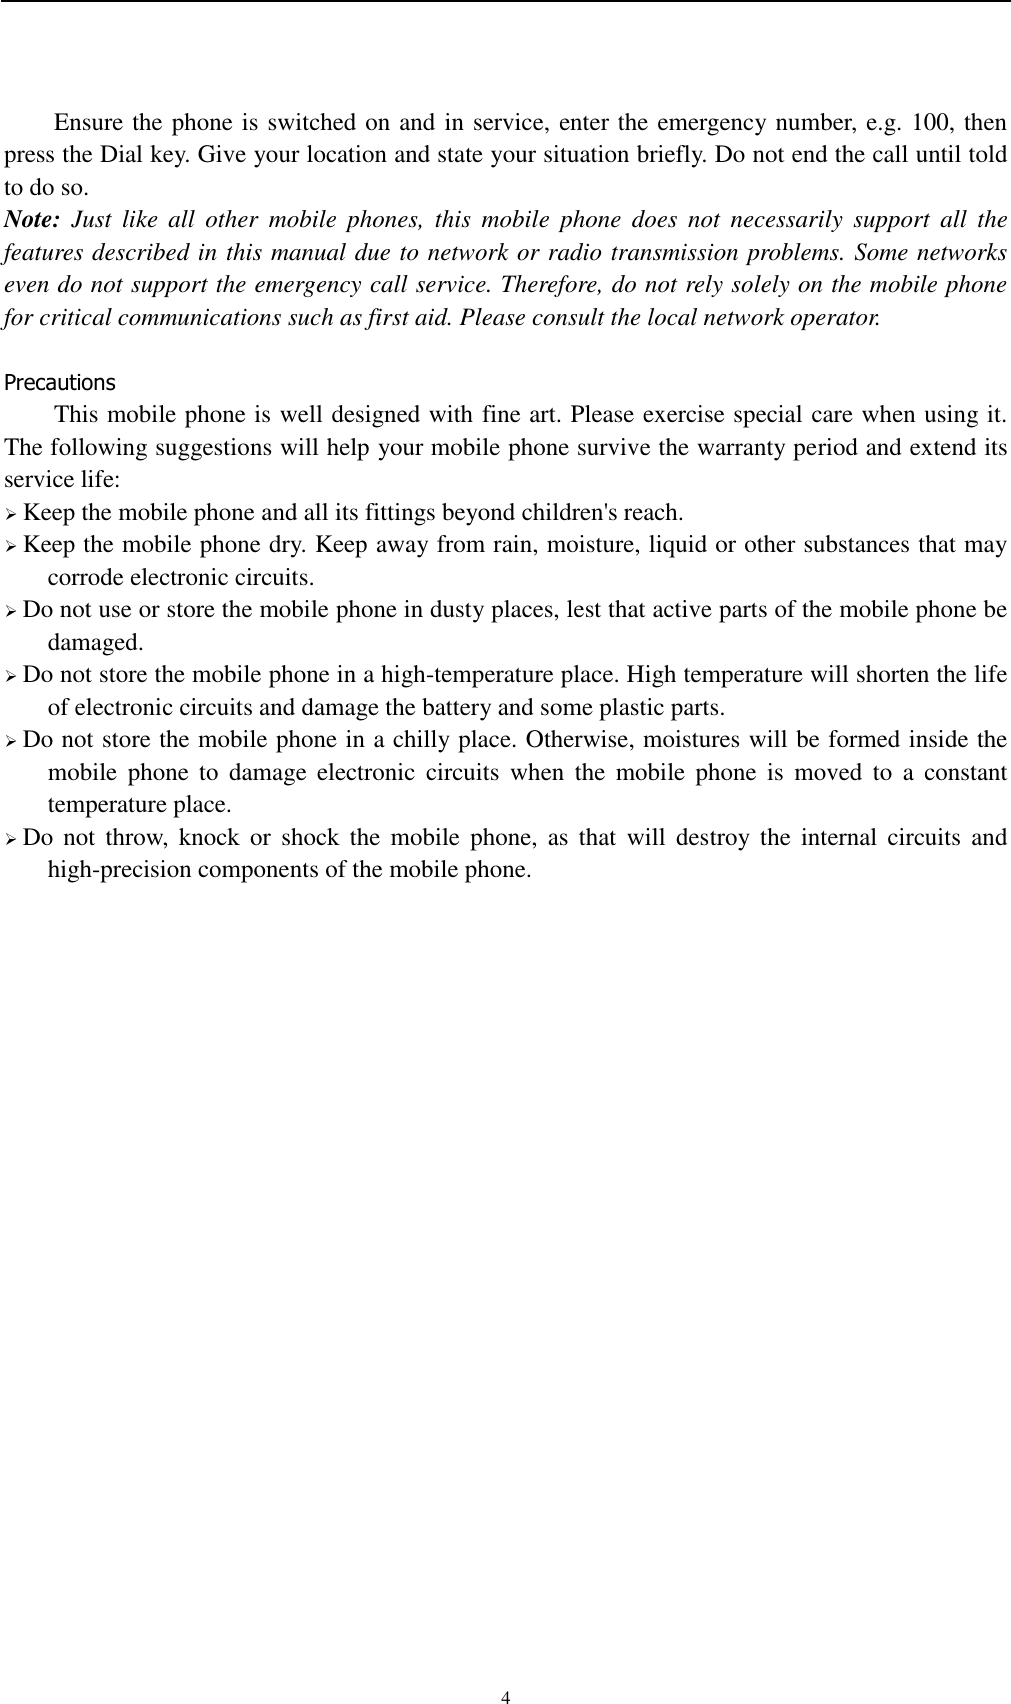    4 Ensure the phone is switched on and in service, enter the emergency number, e.g. 100, then press the Dial key. Give your location and state your situation briefly. Do not end the call until told to do so. Note:  Just  like  all  other  mobile  phones,  this  mobile  phone  does  not  necessarily  support  all  the features described in this manual due to network or radio transmission problems. Some networks even do not support the emergency call service. Therefore, do not rely solely on the mobile phone for critical communications such as first aid. Please consult the local network operator.  Precautions This mobile phone is well designed with fine art. Please exercise special care when using it. The following suggestions will help your mobile phone survive the warranty period and extend its service life:  Keep the mobile phone and all its fittings beyond children&apos;s reach.  Keep the mobile phone dry. Keep away from rain, moisture, liquid or other substances that may corrode electronic circuits.  Do not use or store the mobile phone in dusty places, lest that active parts of the mobile phone be damaged.  Do not store the mobile phone in a high-temperature place. High temperature will shorten the life of electronic circuits and damage the battery and some plastic parts.  Do not store the mobile phone in a chilly place. Otherwise, moistures will be formed inside the mobile  phone  to  damage  electronic  circuits  when  the  mobile  phone  is  moved  to  a  constant temperature place.  Do  not  throw,  knock or  shock  the  mobile phone,  as  that  will  destroy the  internal  circuits and high-precision components of the mobile phone.     